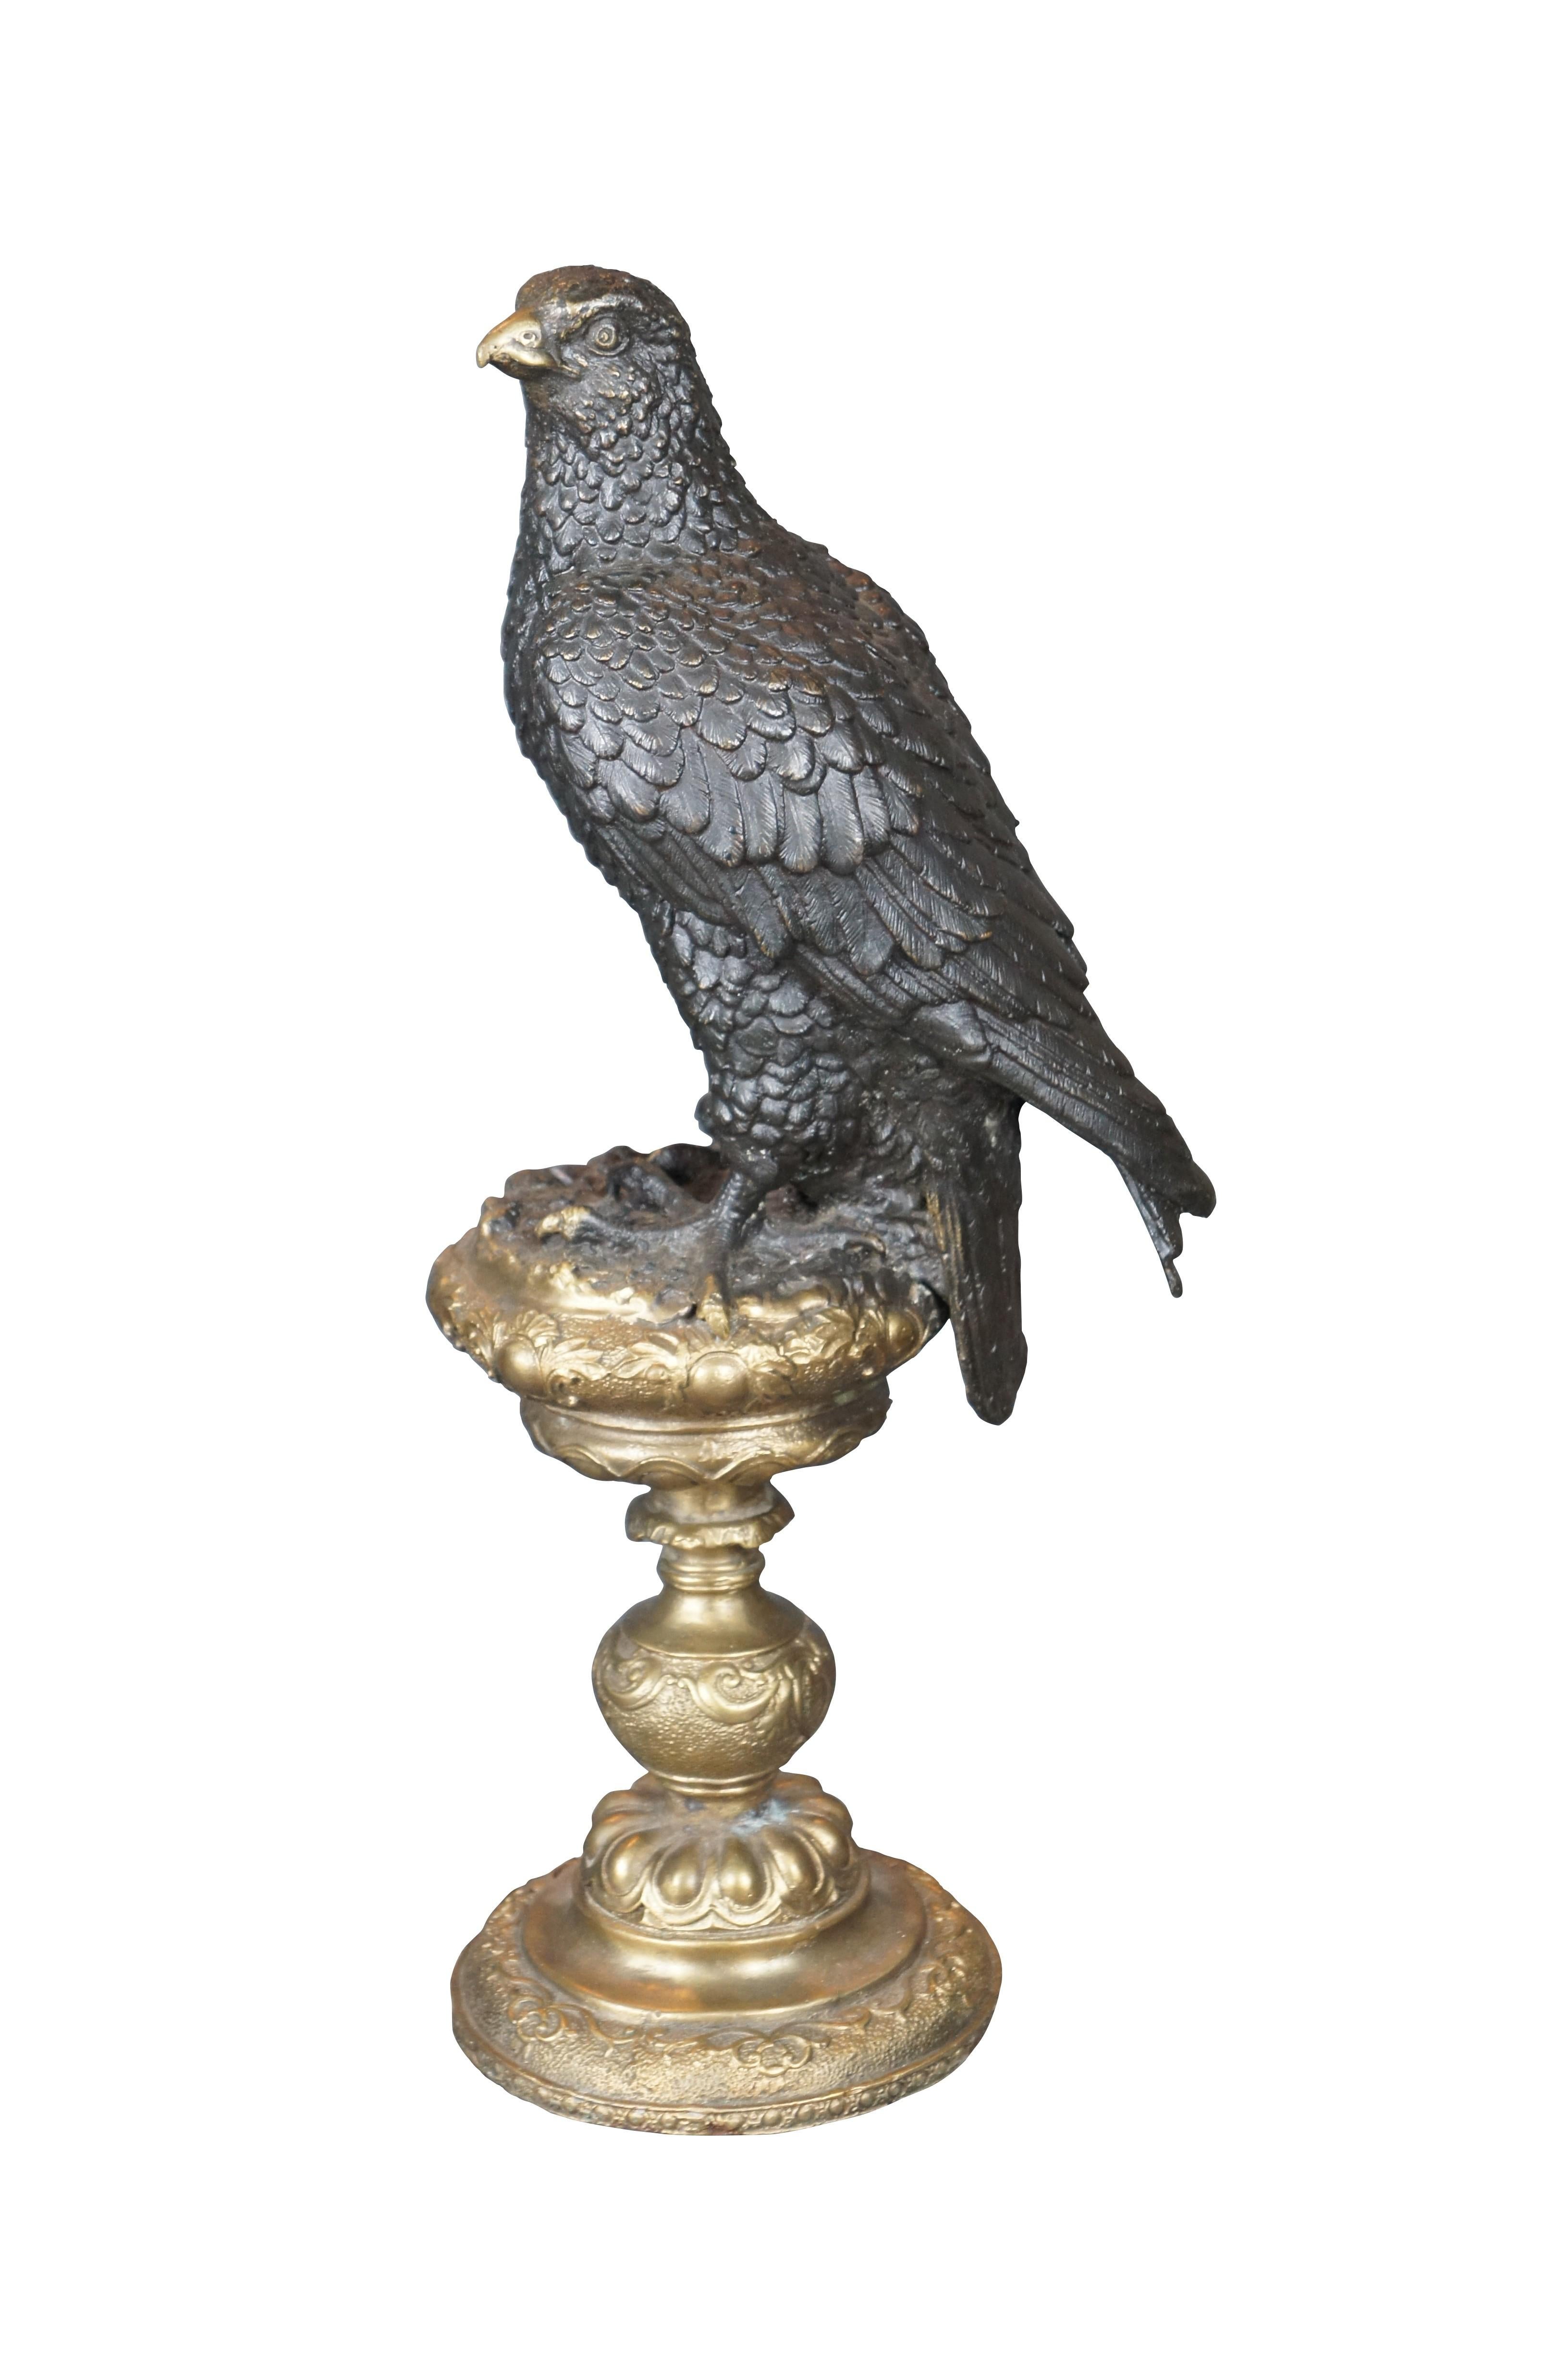 An impressive bronze eagle over an altar stick after Archibald Thorburn (Scottish 1860-1935). Features a bronze figure of a perched golden eagle. The eagle is in black with a gold beak over an ornate gold finished pedestal / altar stick. A beautiful